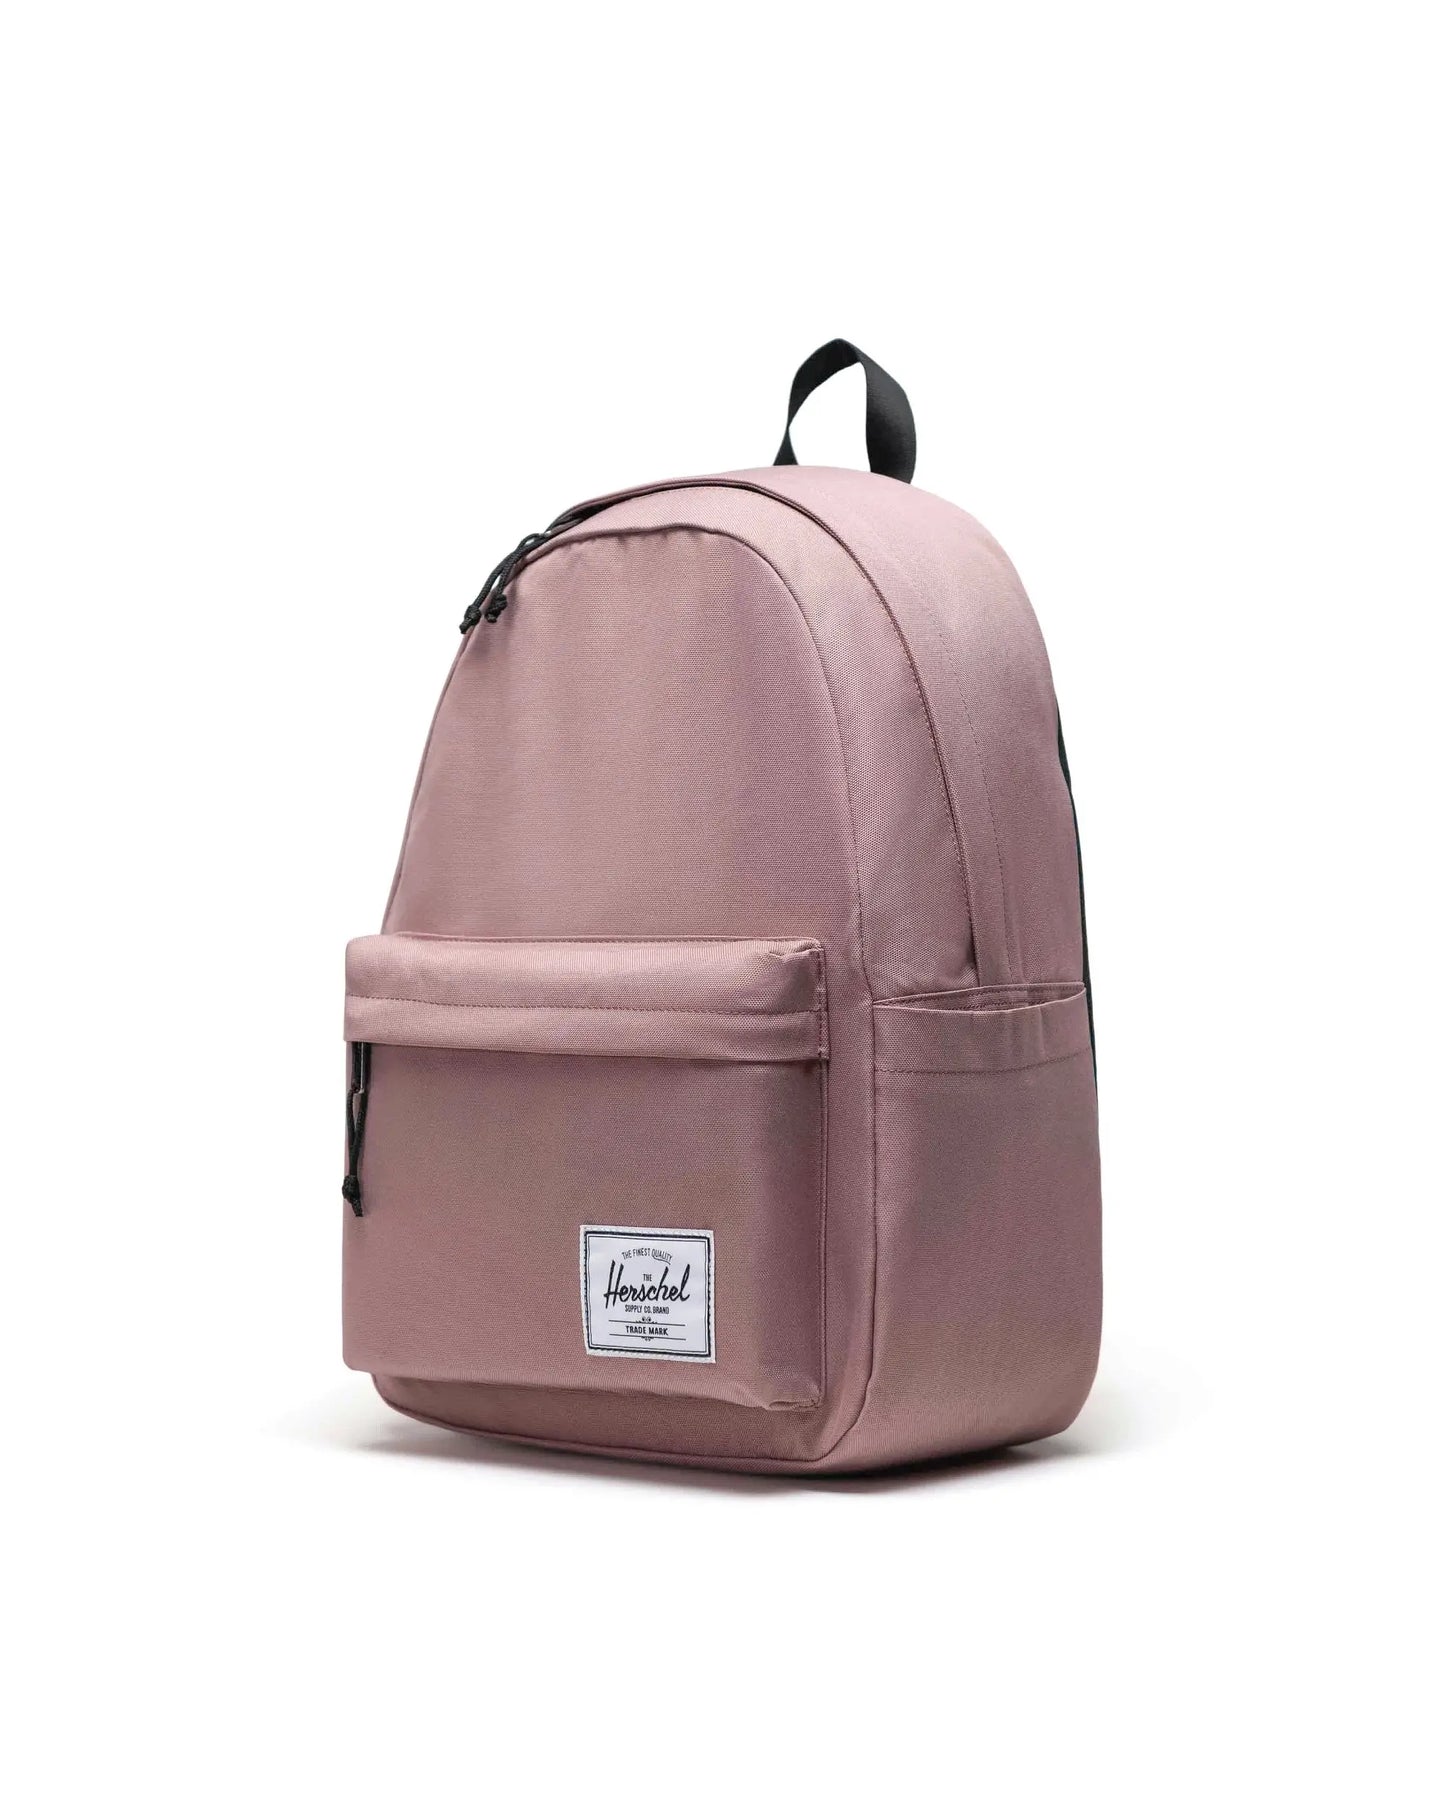 Herschel Supply Co. Ash Rose Classic Backpack XL